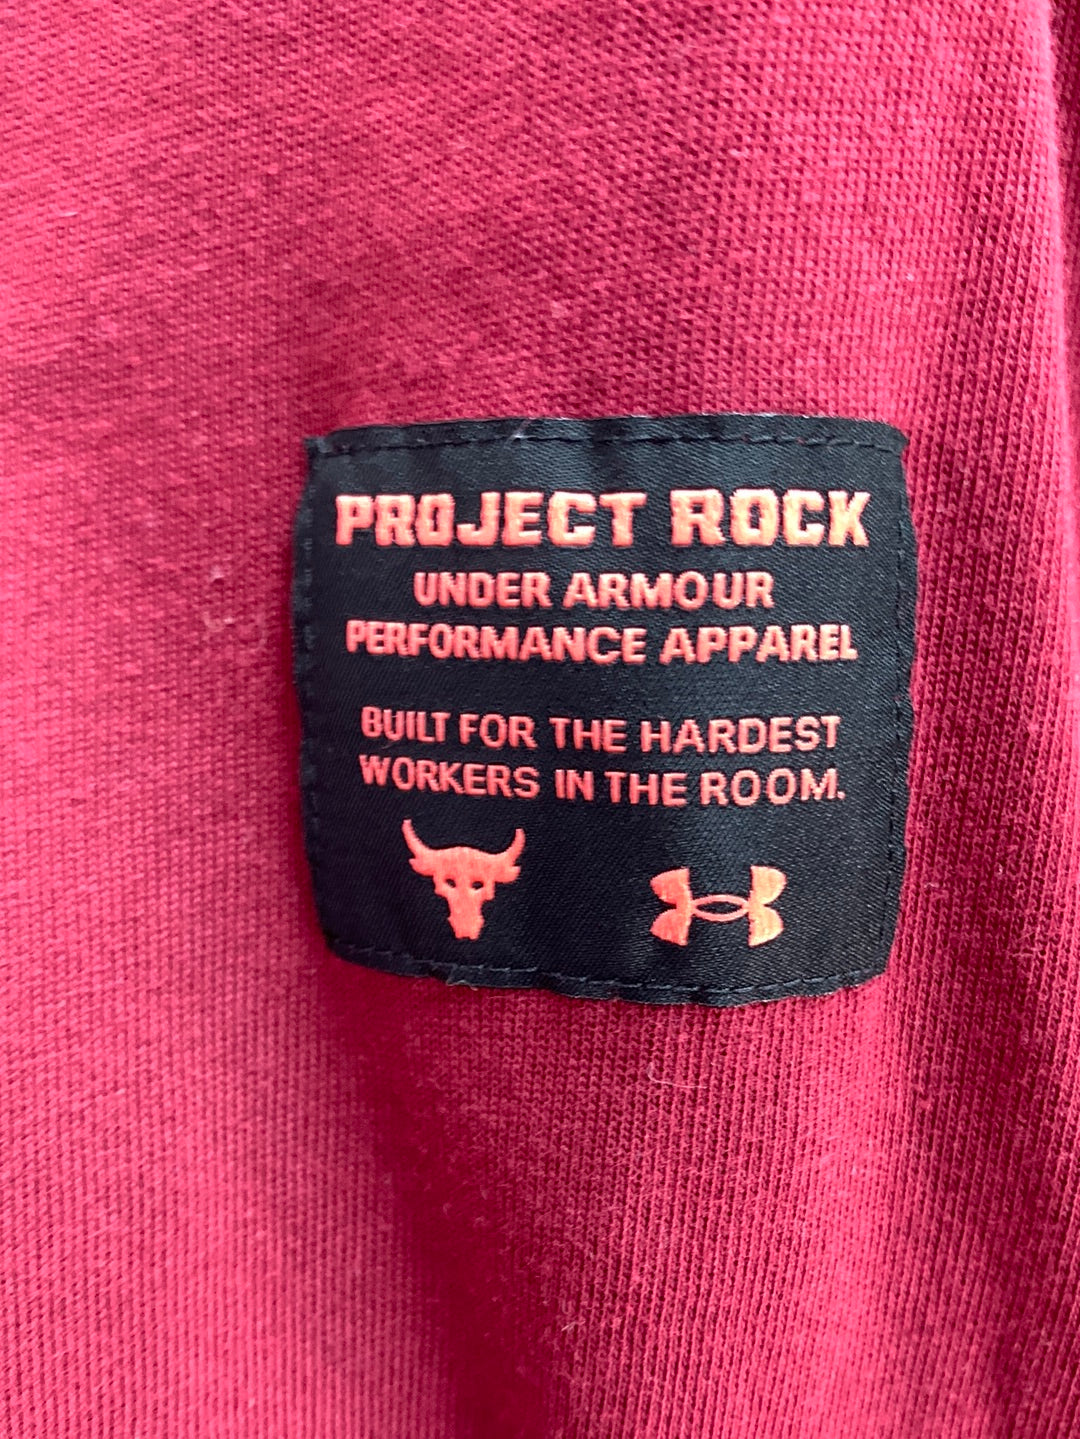 UNDER ARMOUR dark red Bull Project Rock Loose Fit LS T-Shirt - XL